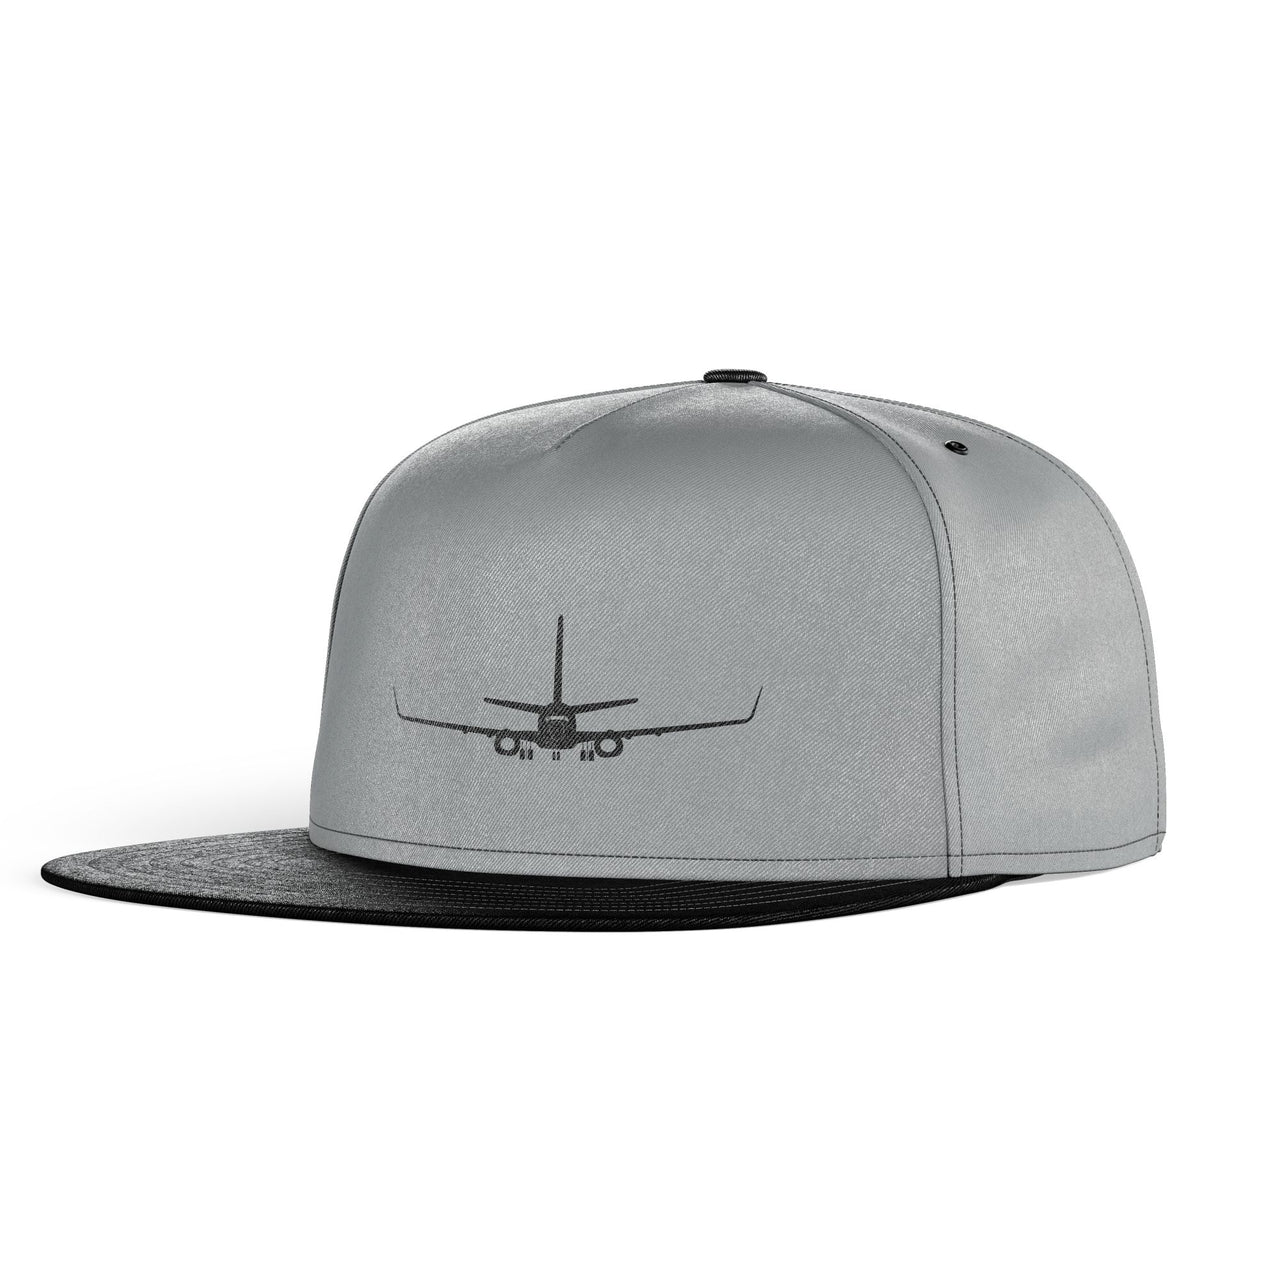 Boeing 737-800NG Silhouette Designed Snapback Caps & Hats